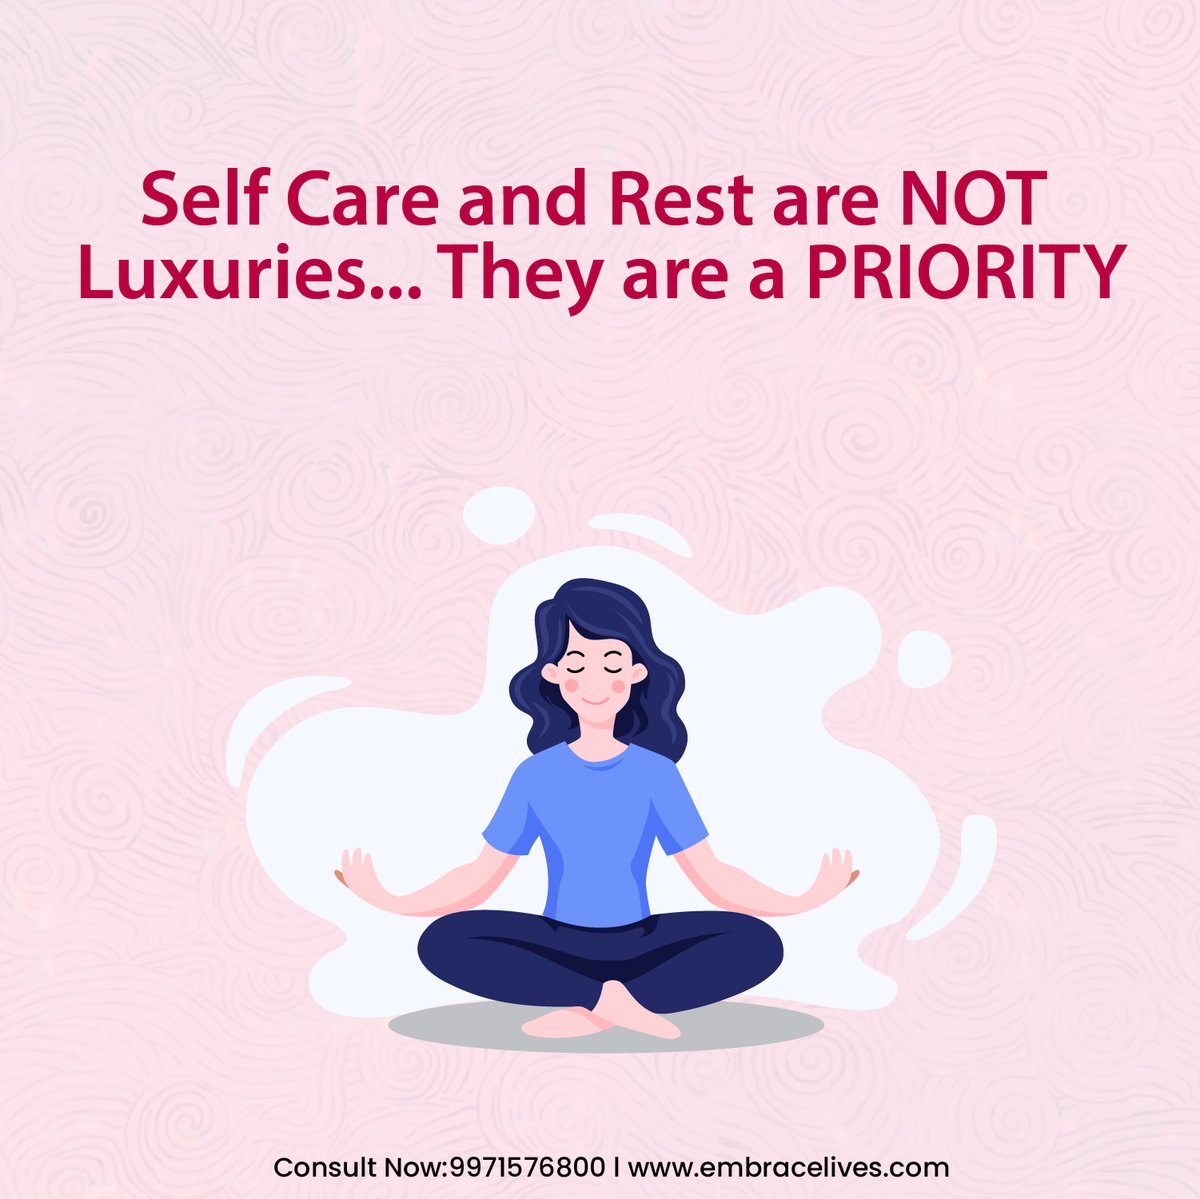 Self care is a priority! Make sure to take care of yourself ...!

Follow eMbrace Making Mental Healthcare Accessible  for more mental hralth content

#embracelives #selfcare #mentalhealth #selfimprovement #mentalhealthmatters #mentalhealthsupport